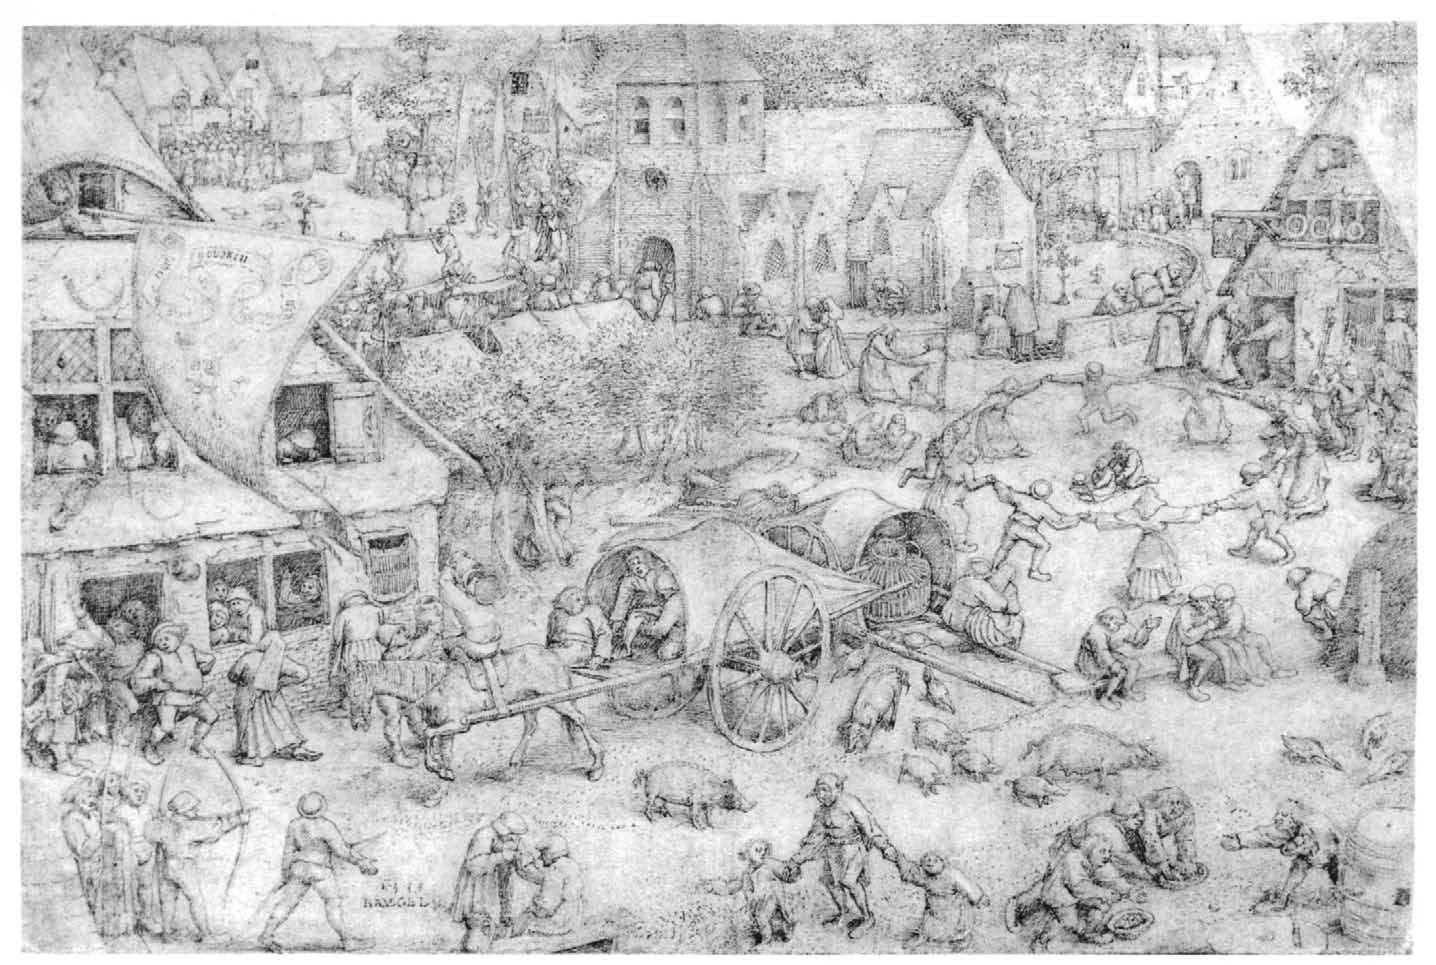 As Europe's forests were felled to grow crops, pigs took up residence in towns, as in this 1559 sketch "Fair at Hoboken" by Breugel the Elder. The pig's scavenging habits — which included the occasional human corpse — was one factor in a decline in the reputation of pigs and pork in the late Middle Ages.